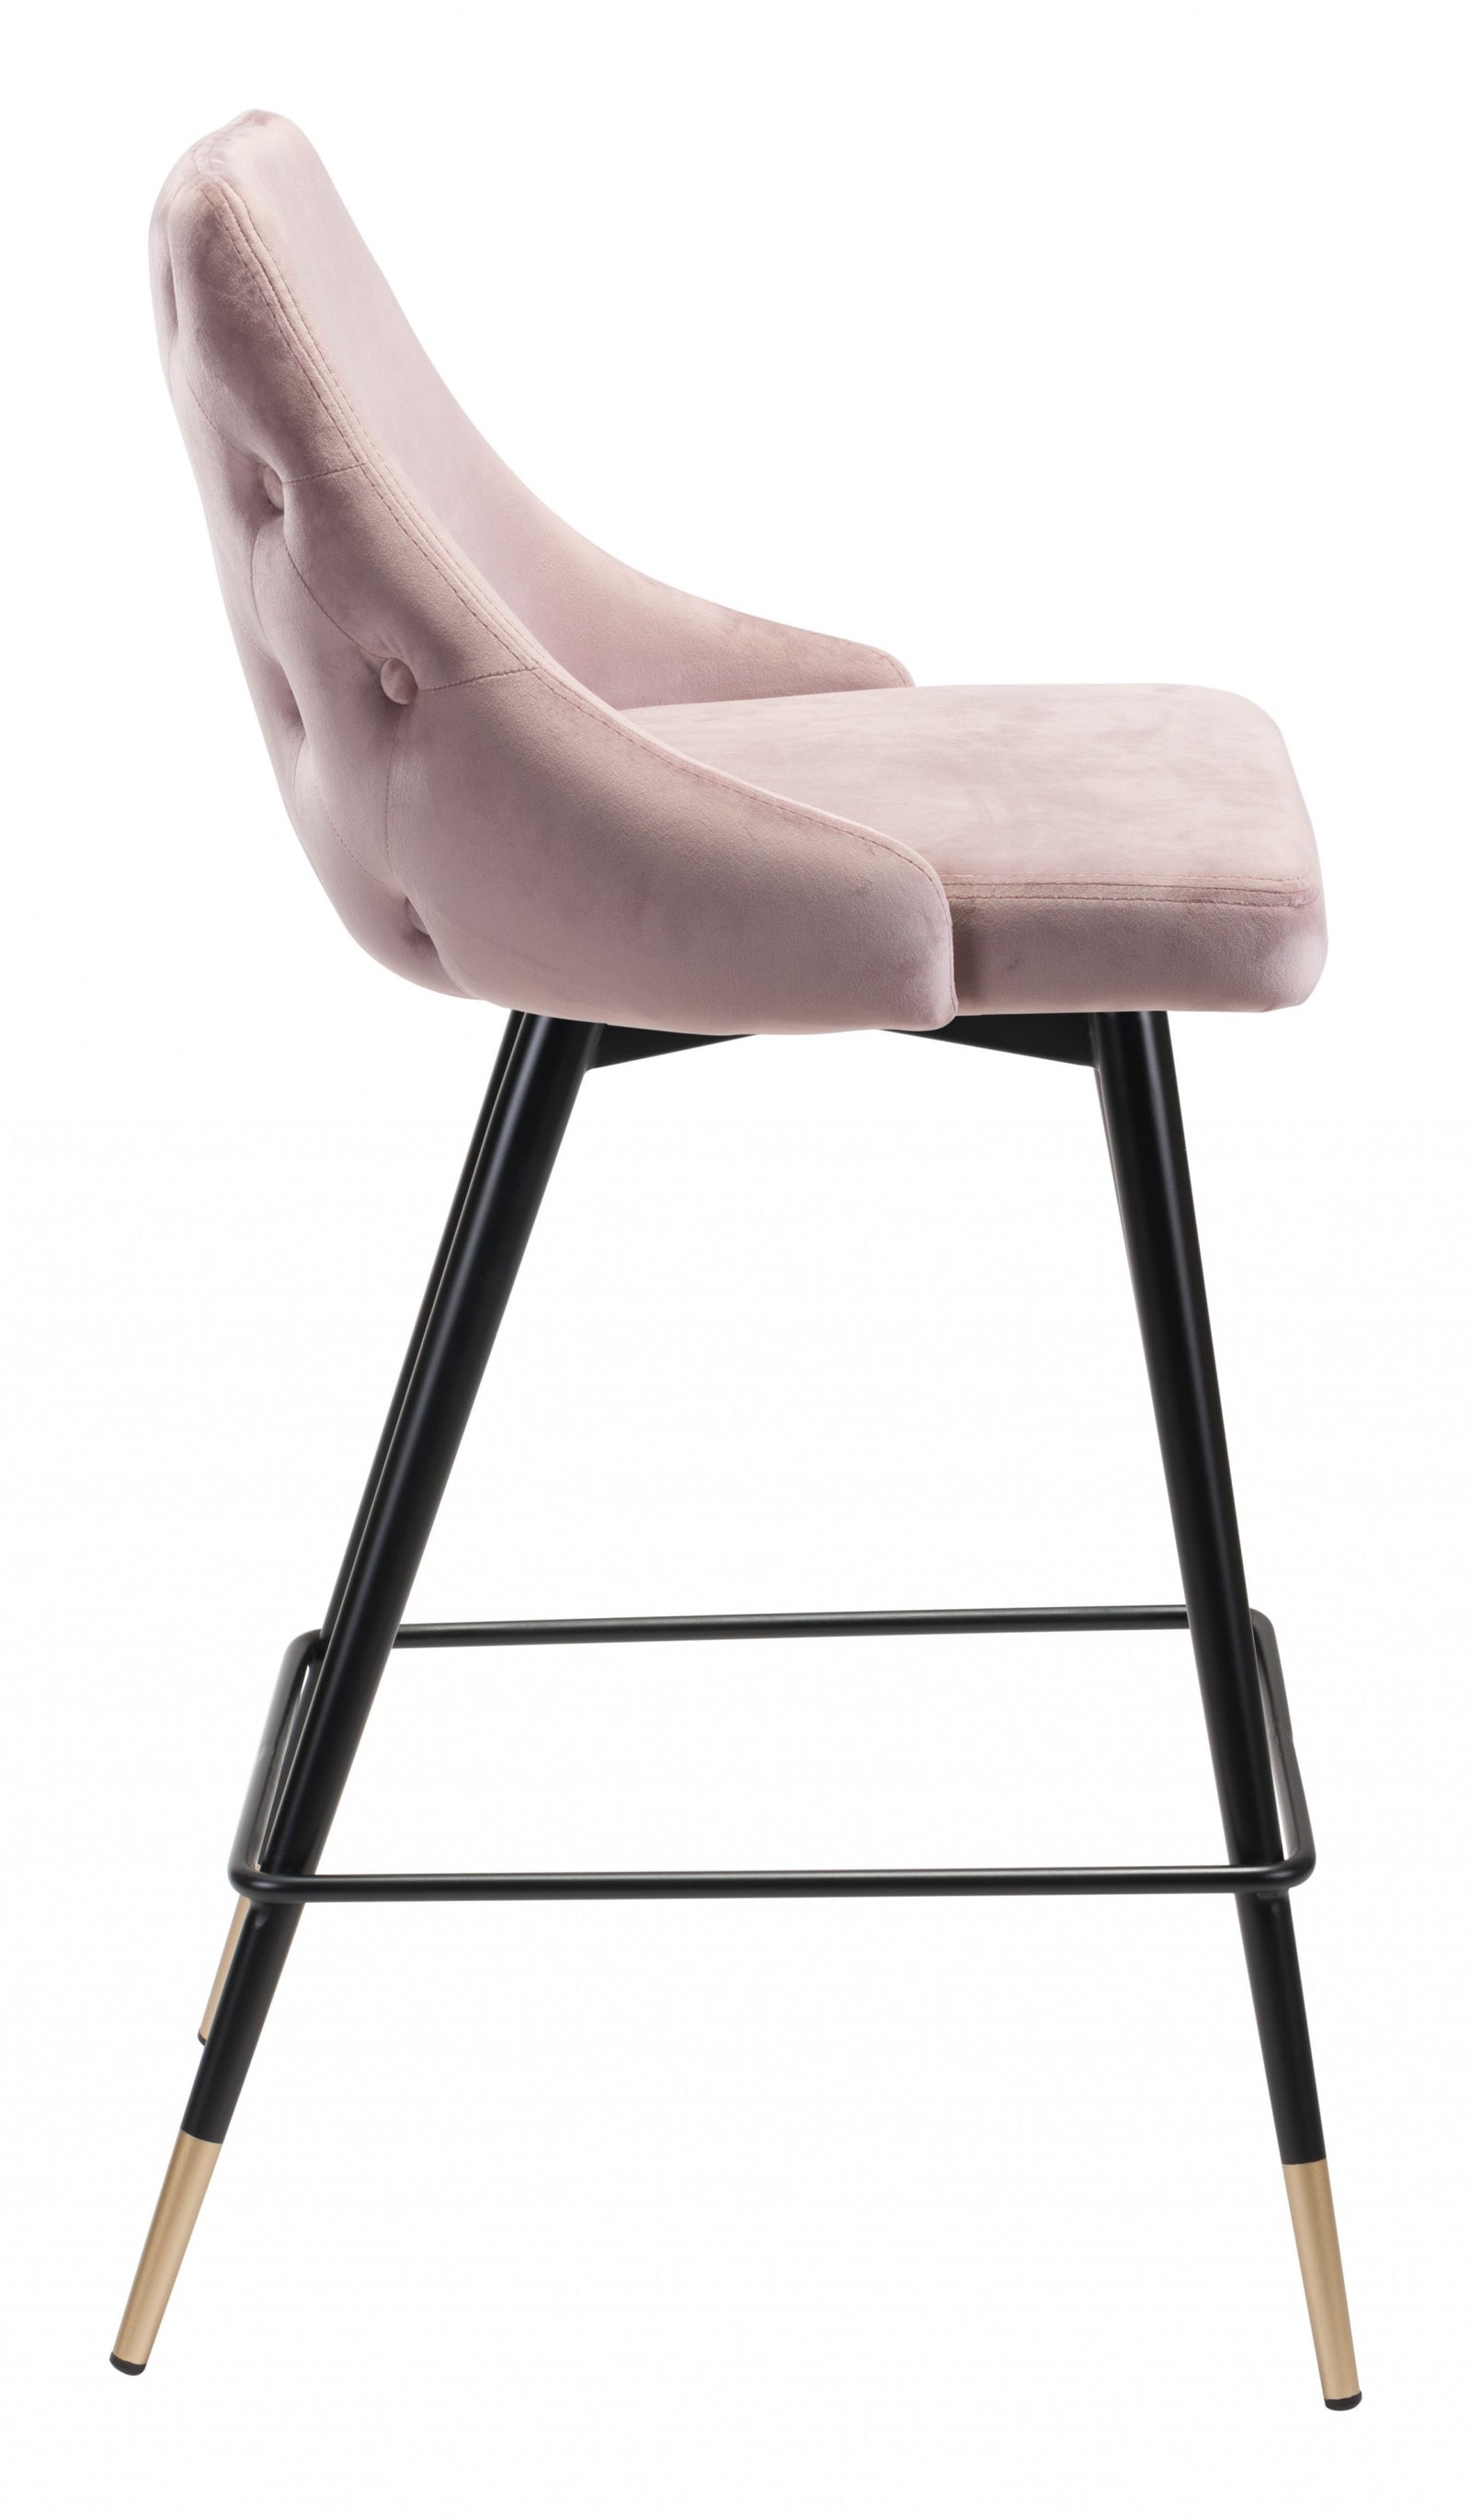 36" Pink Tufted Velvet and Black Counter Height Bar Chair With Footrest